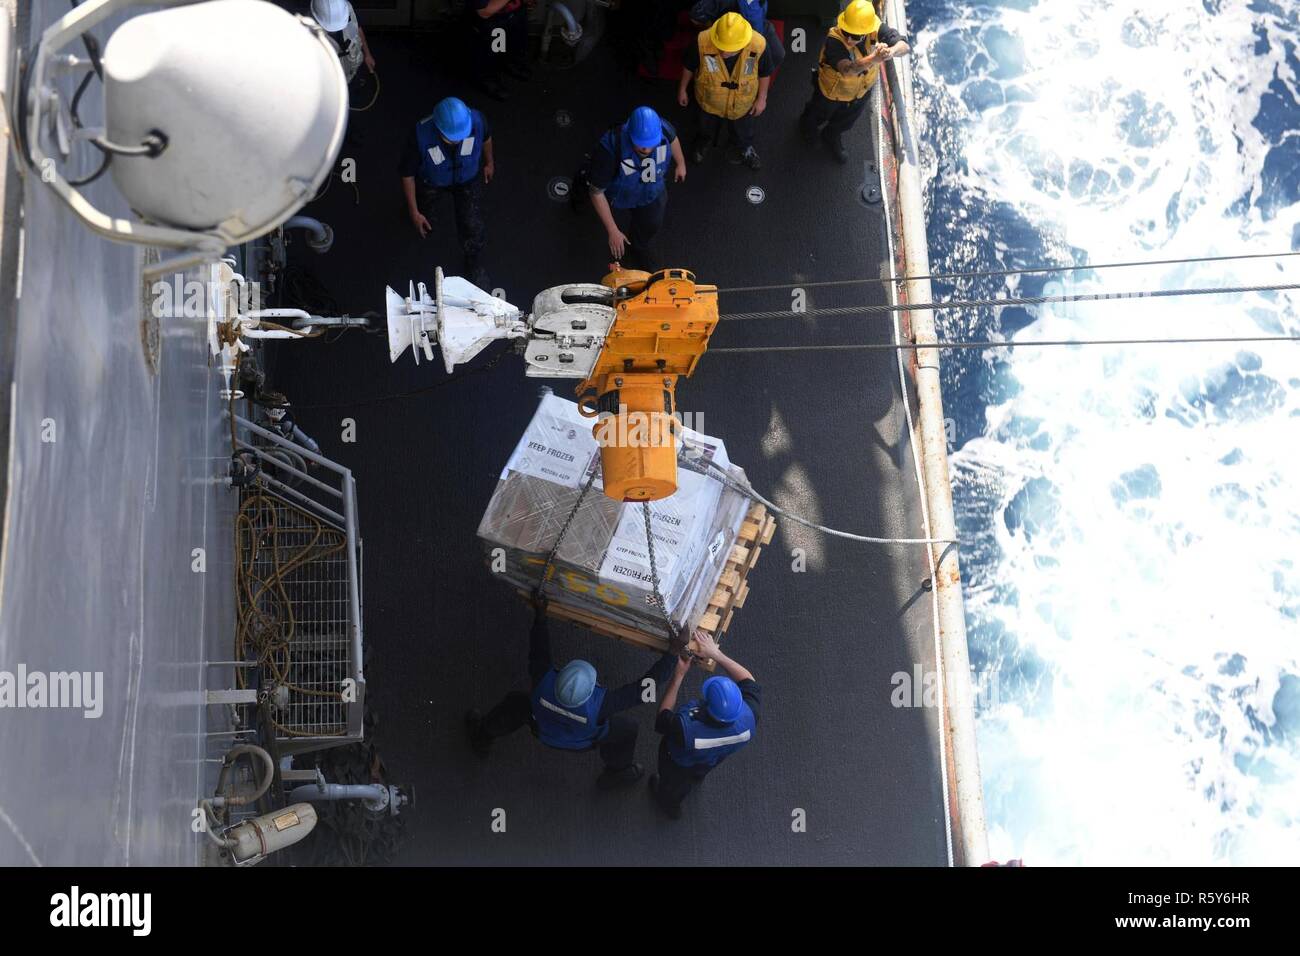 5TH FLEET AREA OF OPERATIONS (April 21, 2017) Sailors aboard the amphibious dock landing ship USS Carter Hall (LSD 50) control a pallet of supplies during an underway replenishment with the dry cargo and ammunition ship USNS Washington Chambers (T-AKE 11). Carter Hall, part of the Bataan Amphibious Ready Group, is deployed to the U.S. 5th Fleet area of operations in support of maritime security operations designed to reassure allies and partners, and preserve the freedom of navigation and the free flow of commerce in the region. Stock Photo